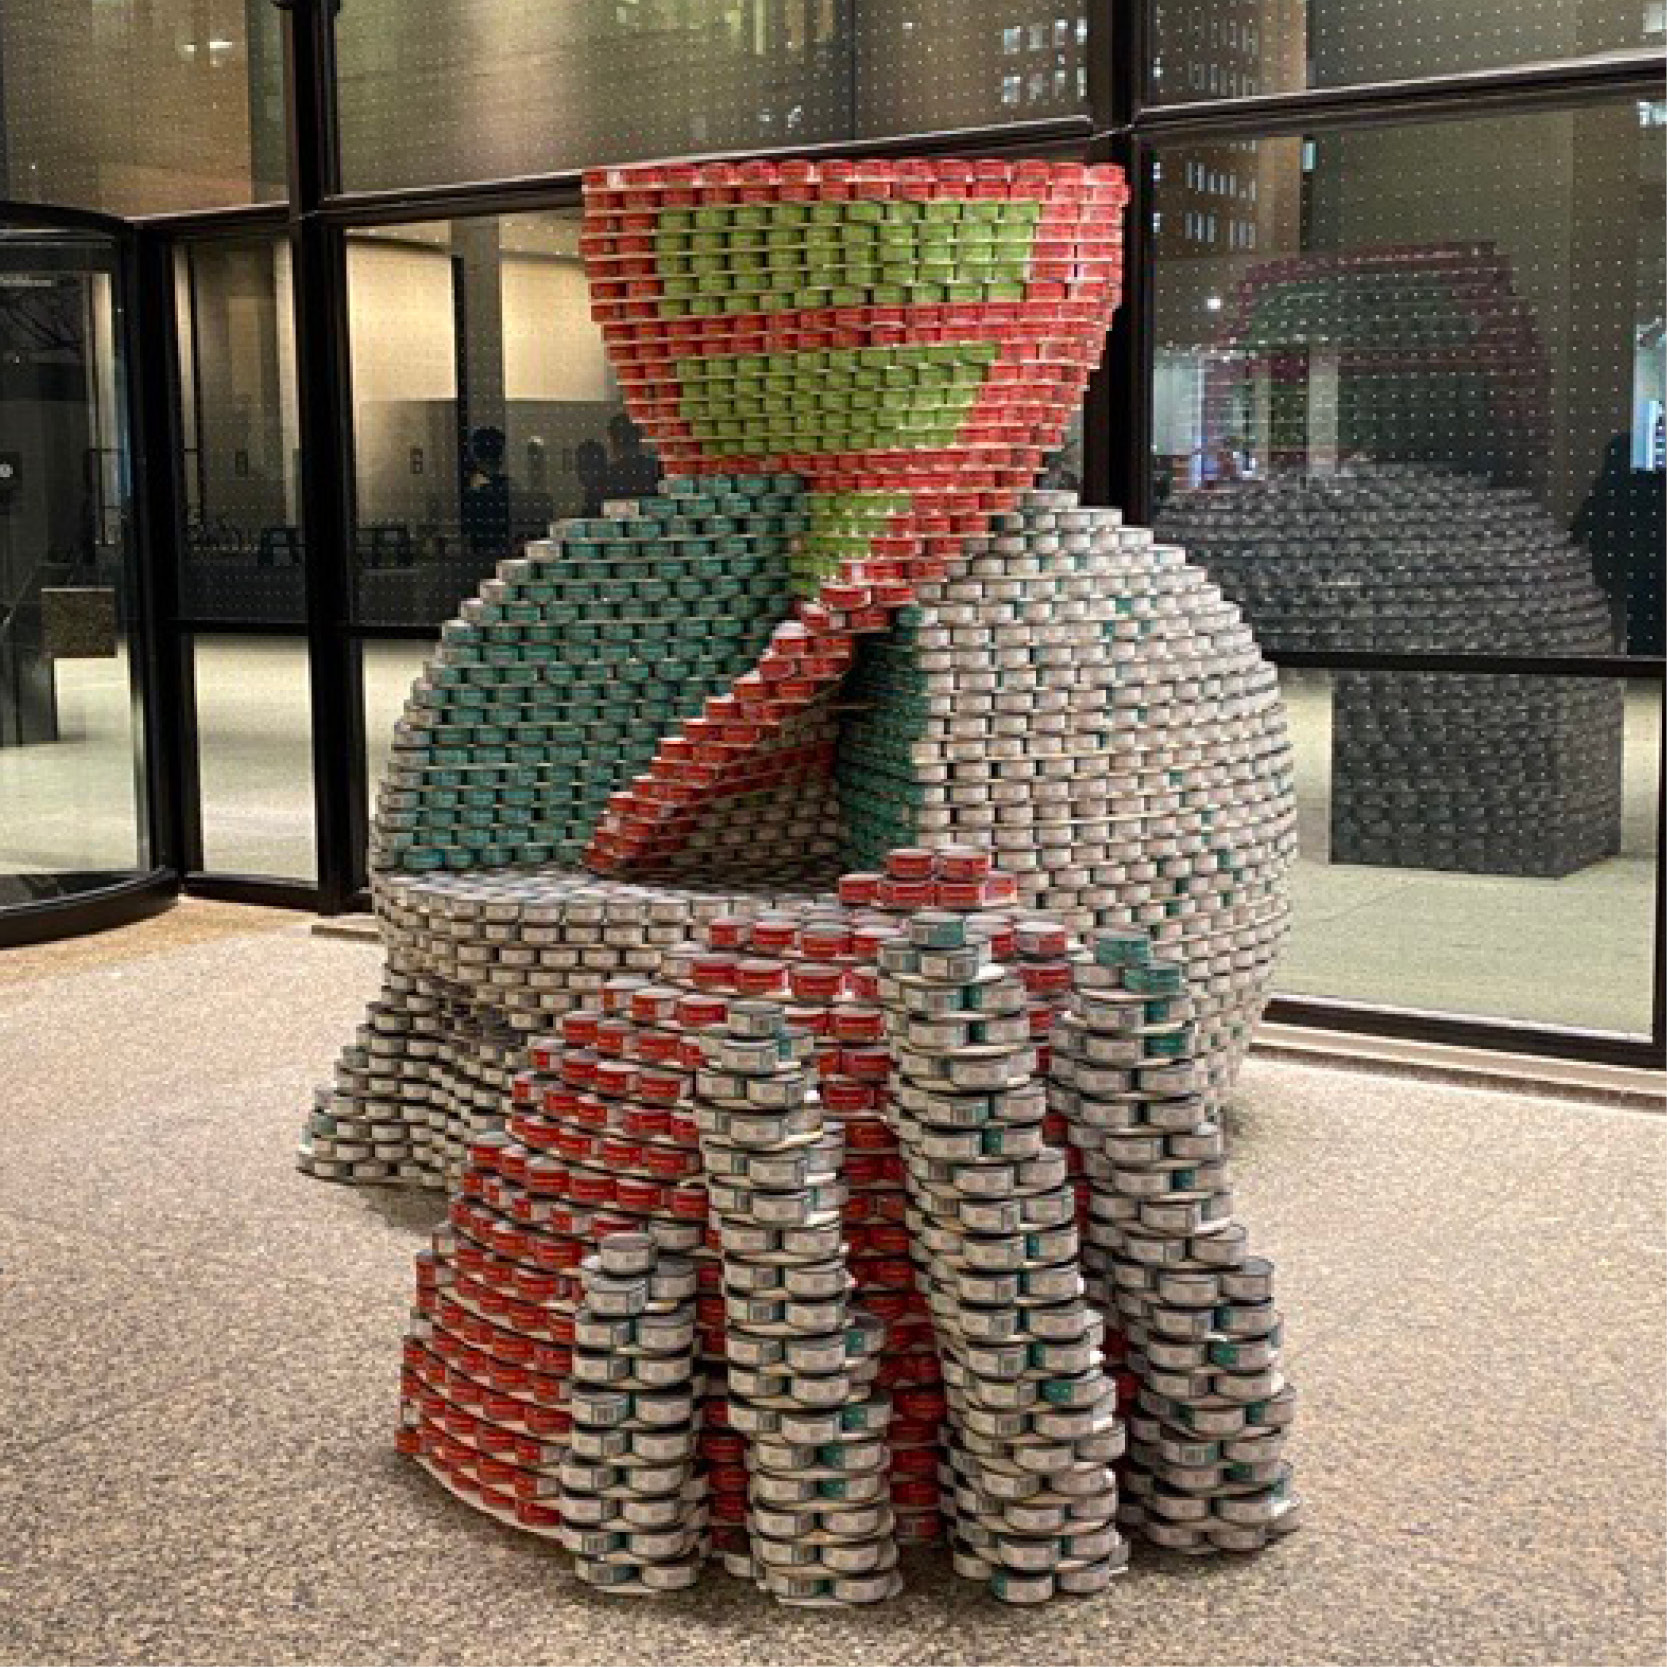 From Cans to Compassion: A49 GTA Participates in this year's CANstruction